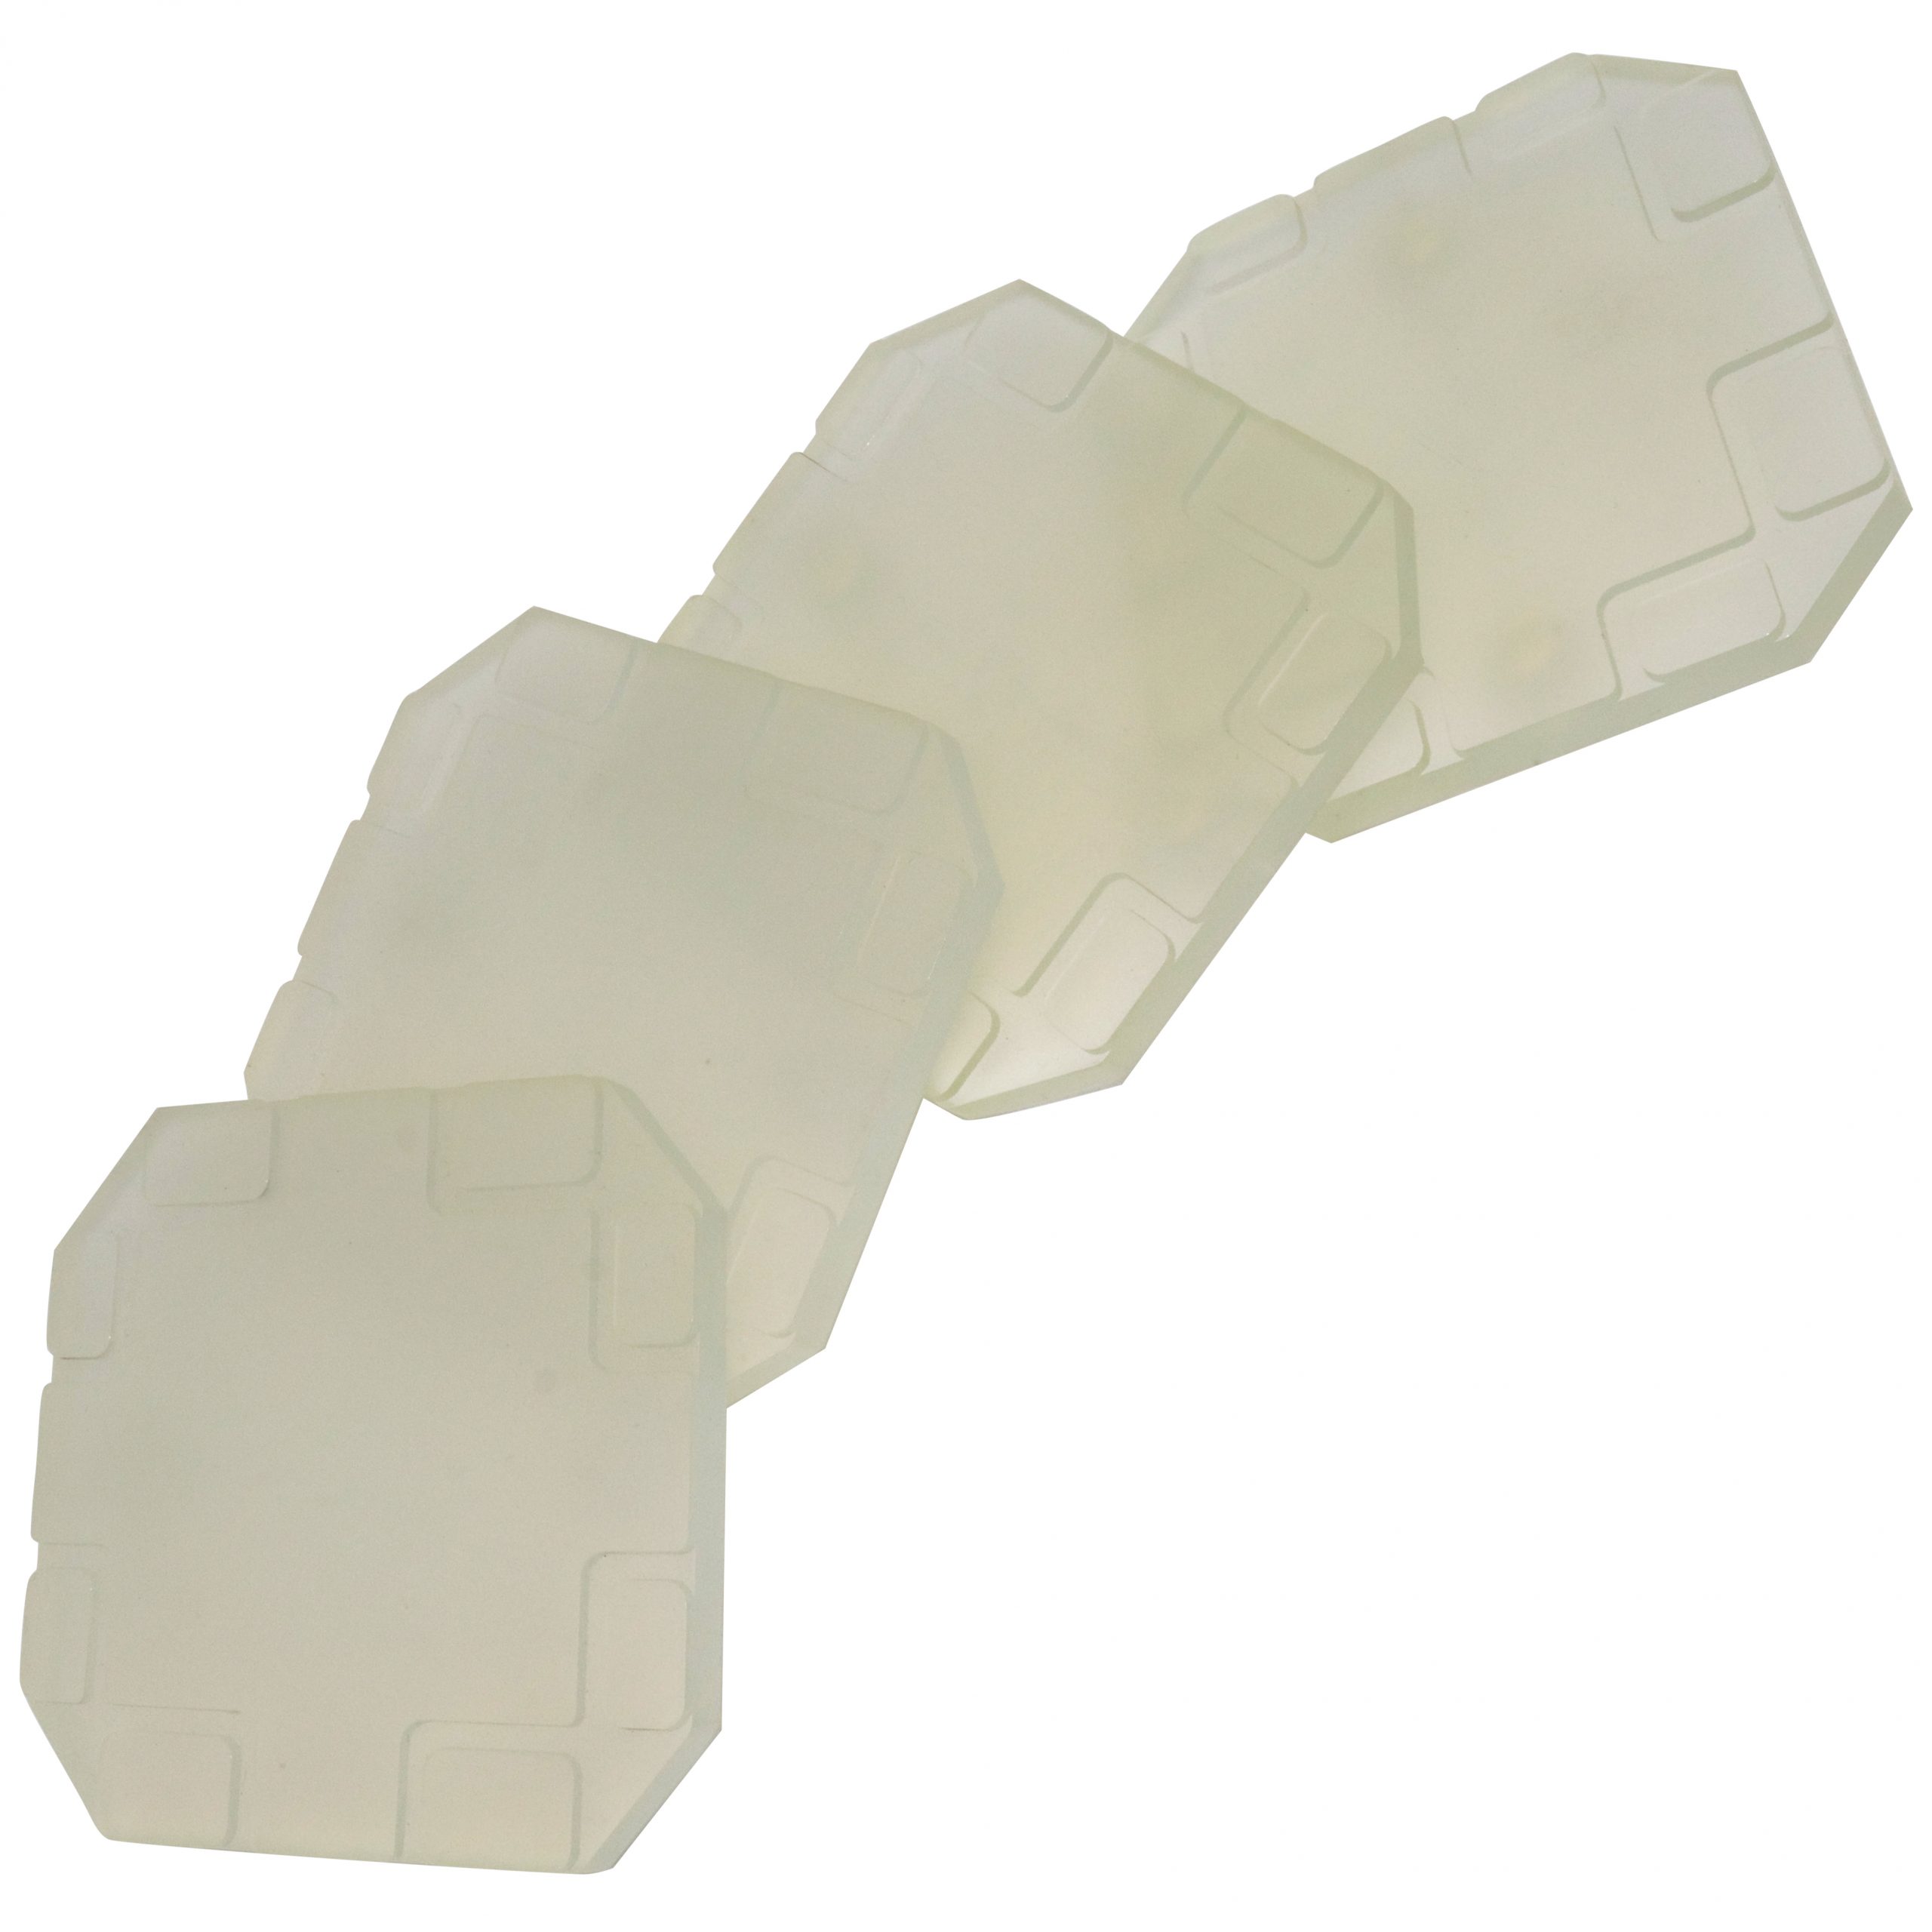 Shark - 51671 - Lift Pad Rubber Block Molded 6x4 3/4x6in. - (Pack of 4)